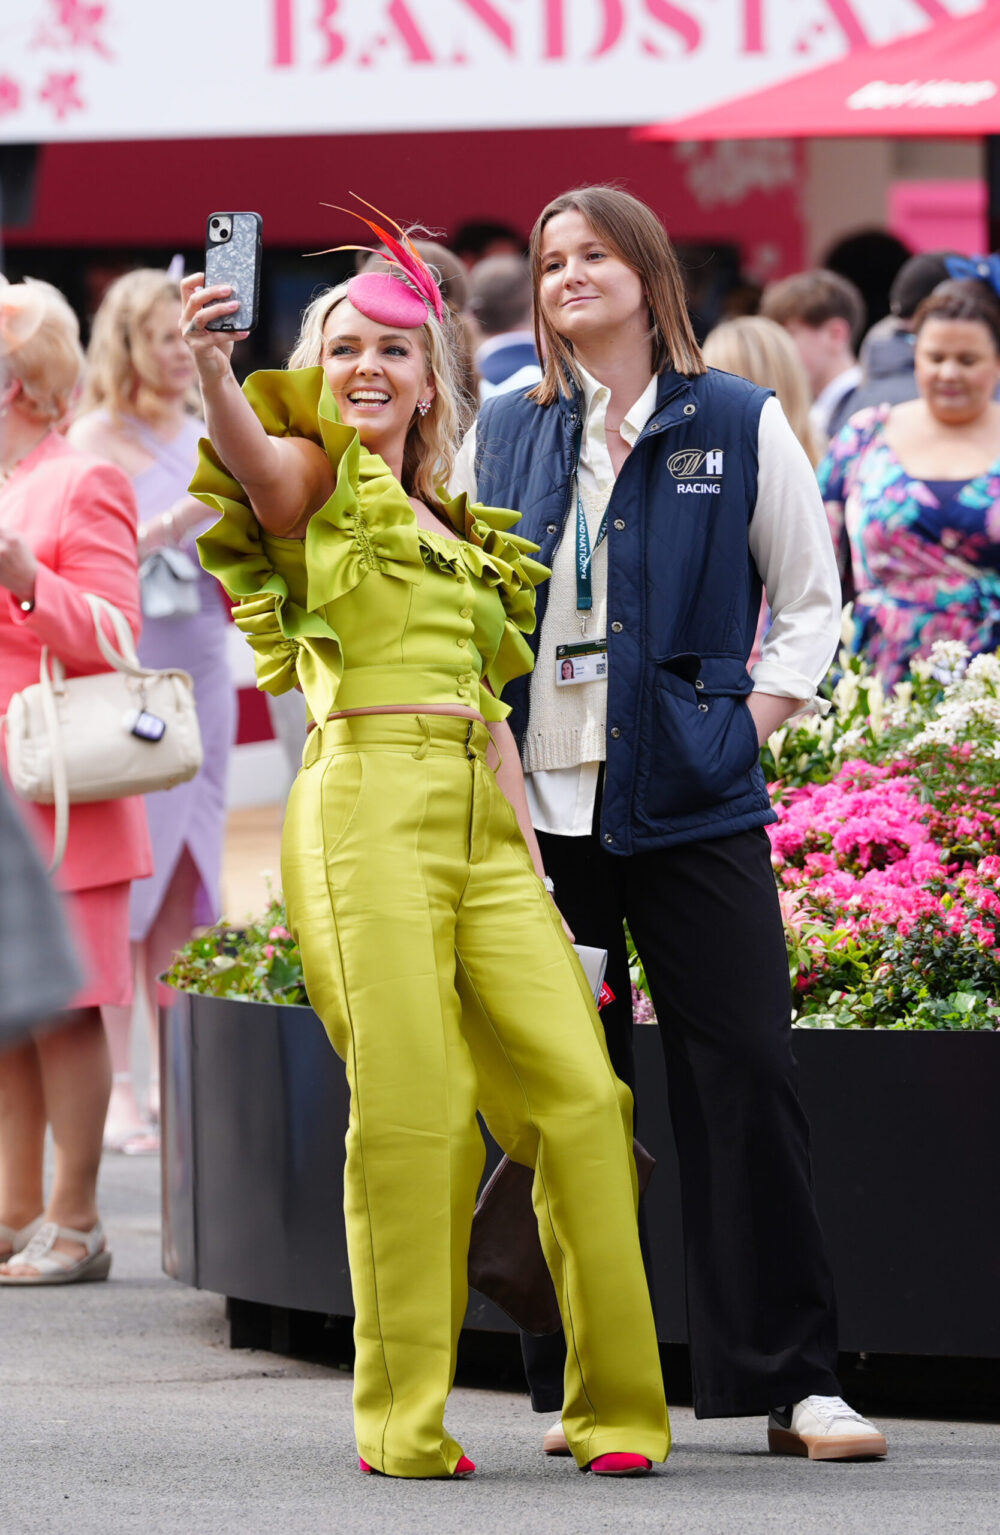 Ladies Day - Grand National Festival - Aintree Racecourse. Credit: Peter Byrne / PA